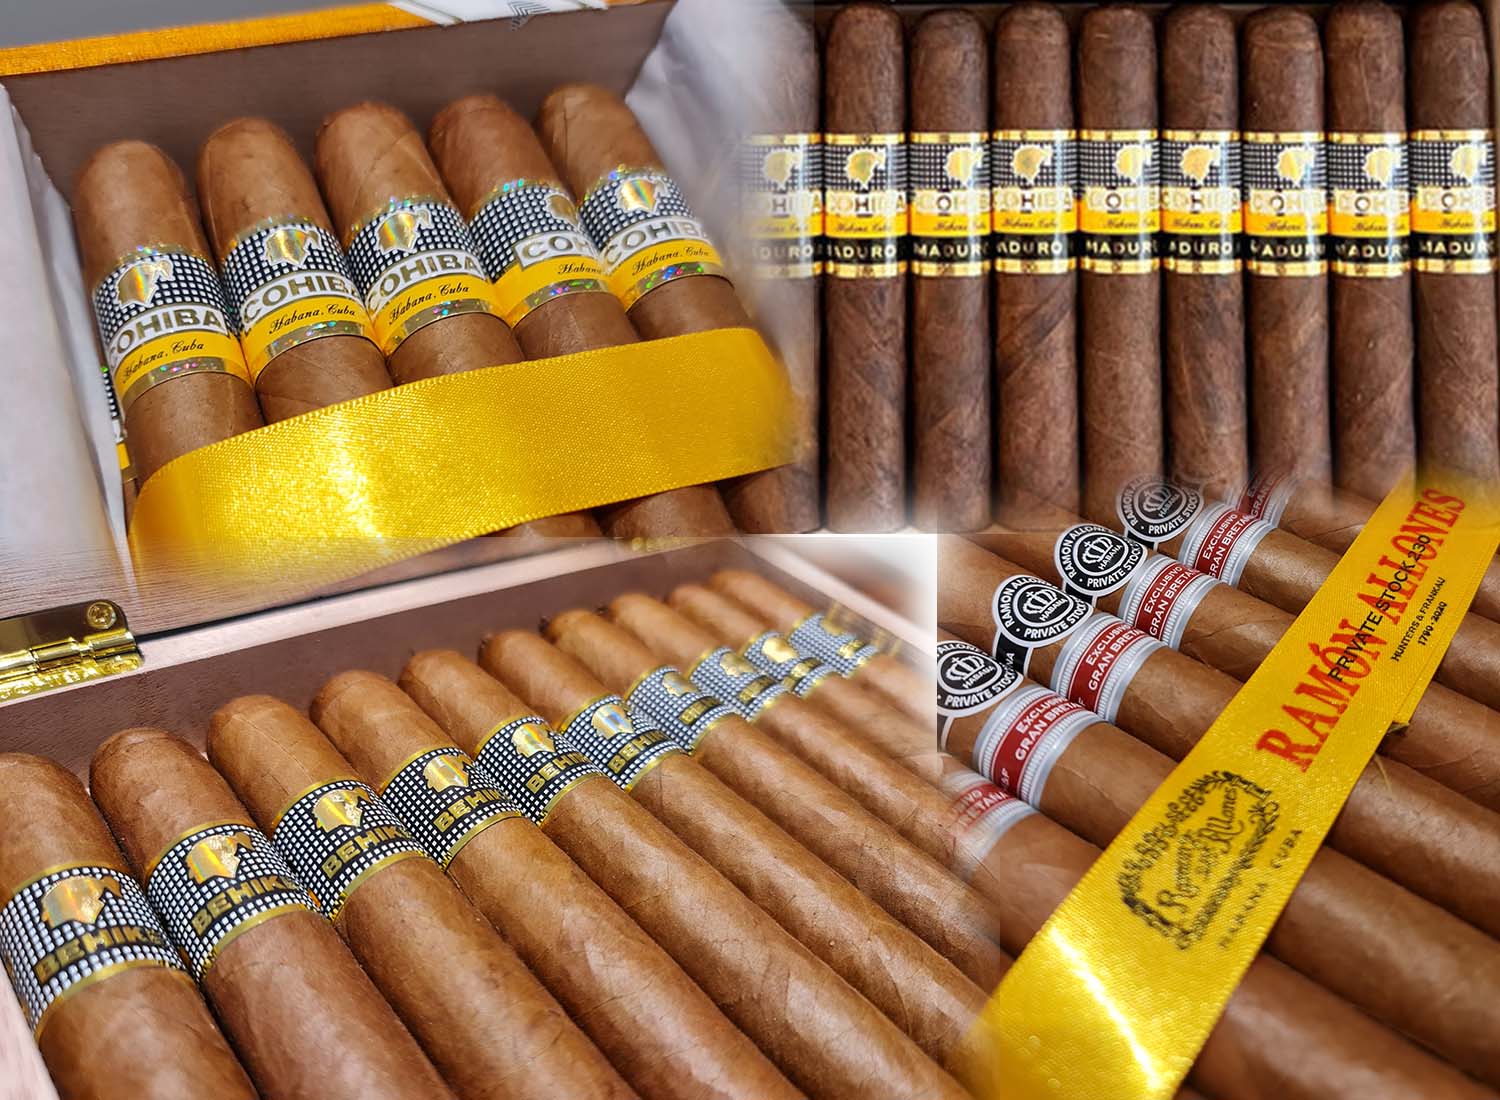 Selection of some of the Finest Cuban Cigars